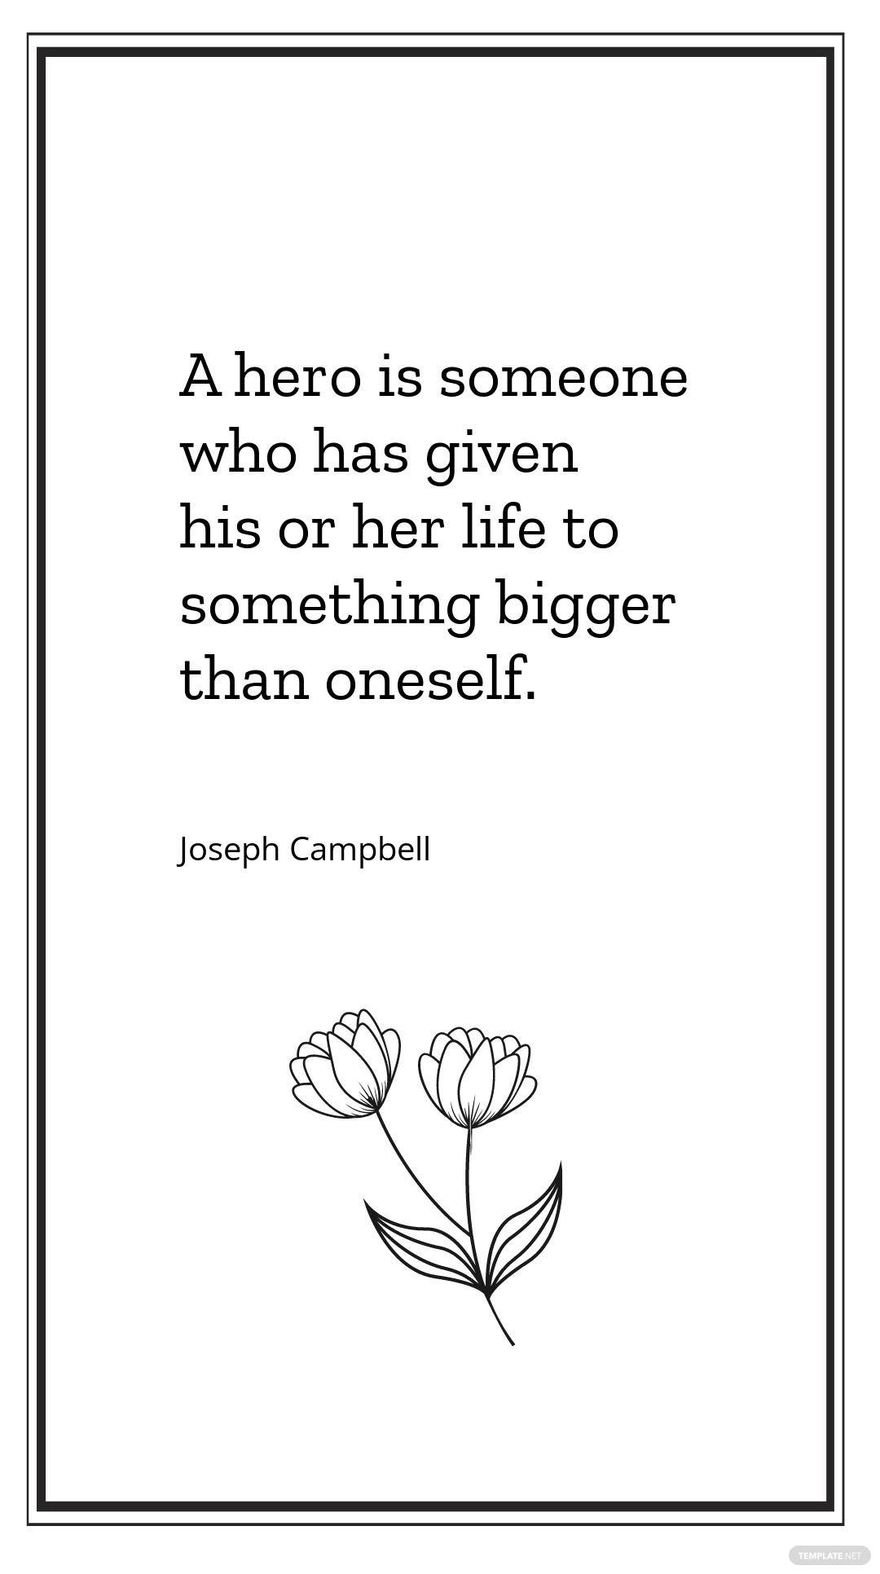 Joseph Campbell - A hero is someone who has given his or her life to something bigger than oneself. in JPG